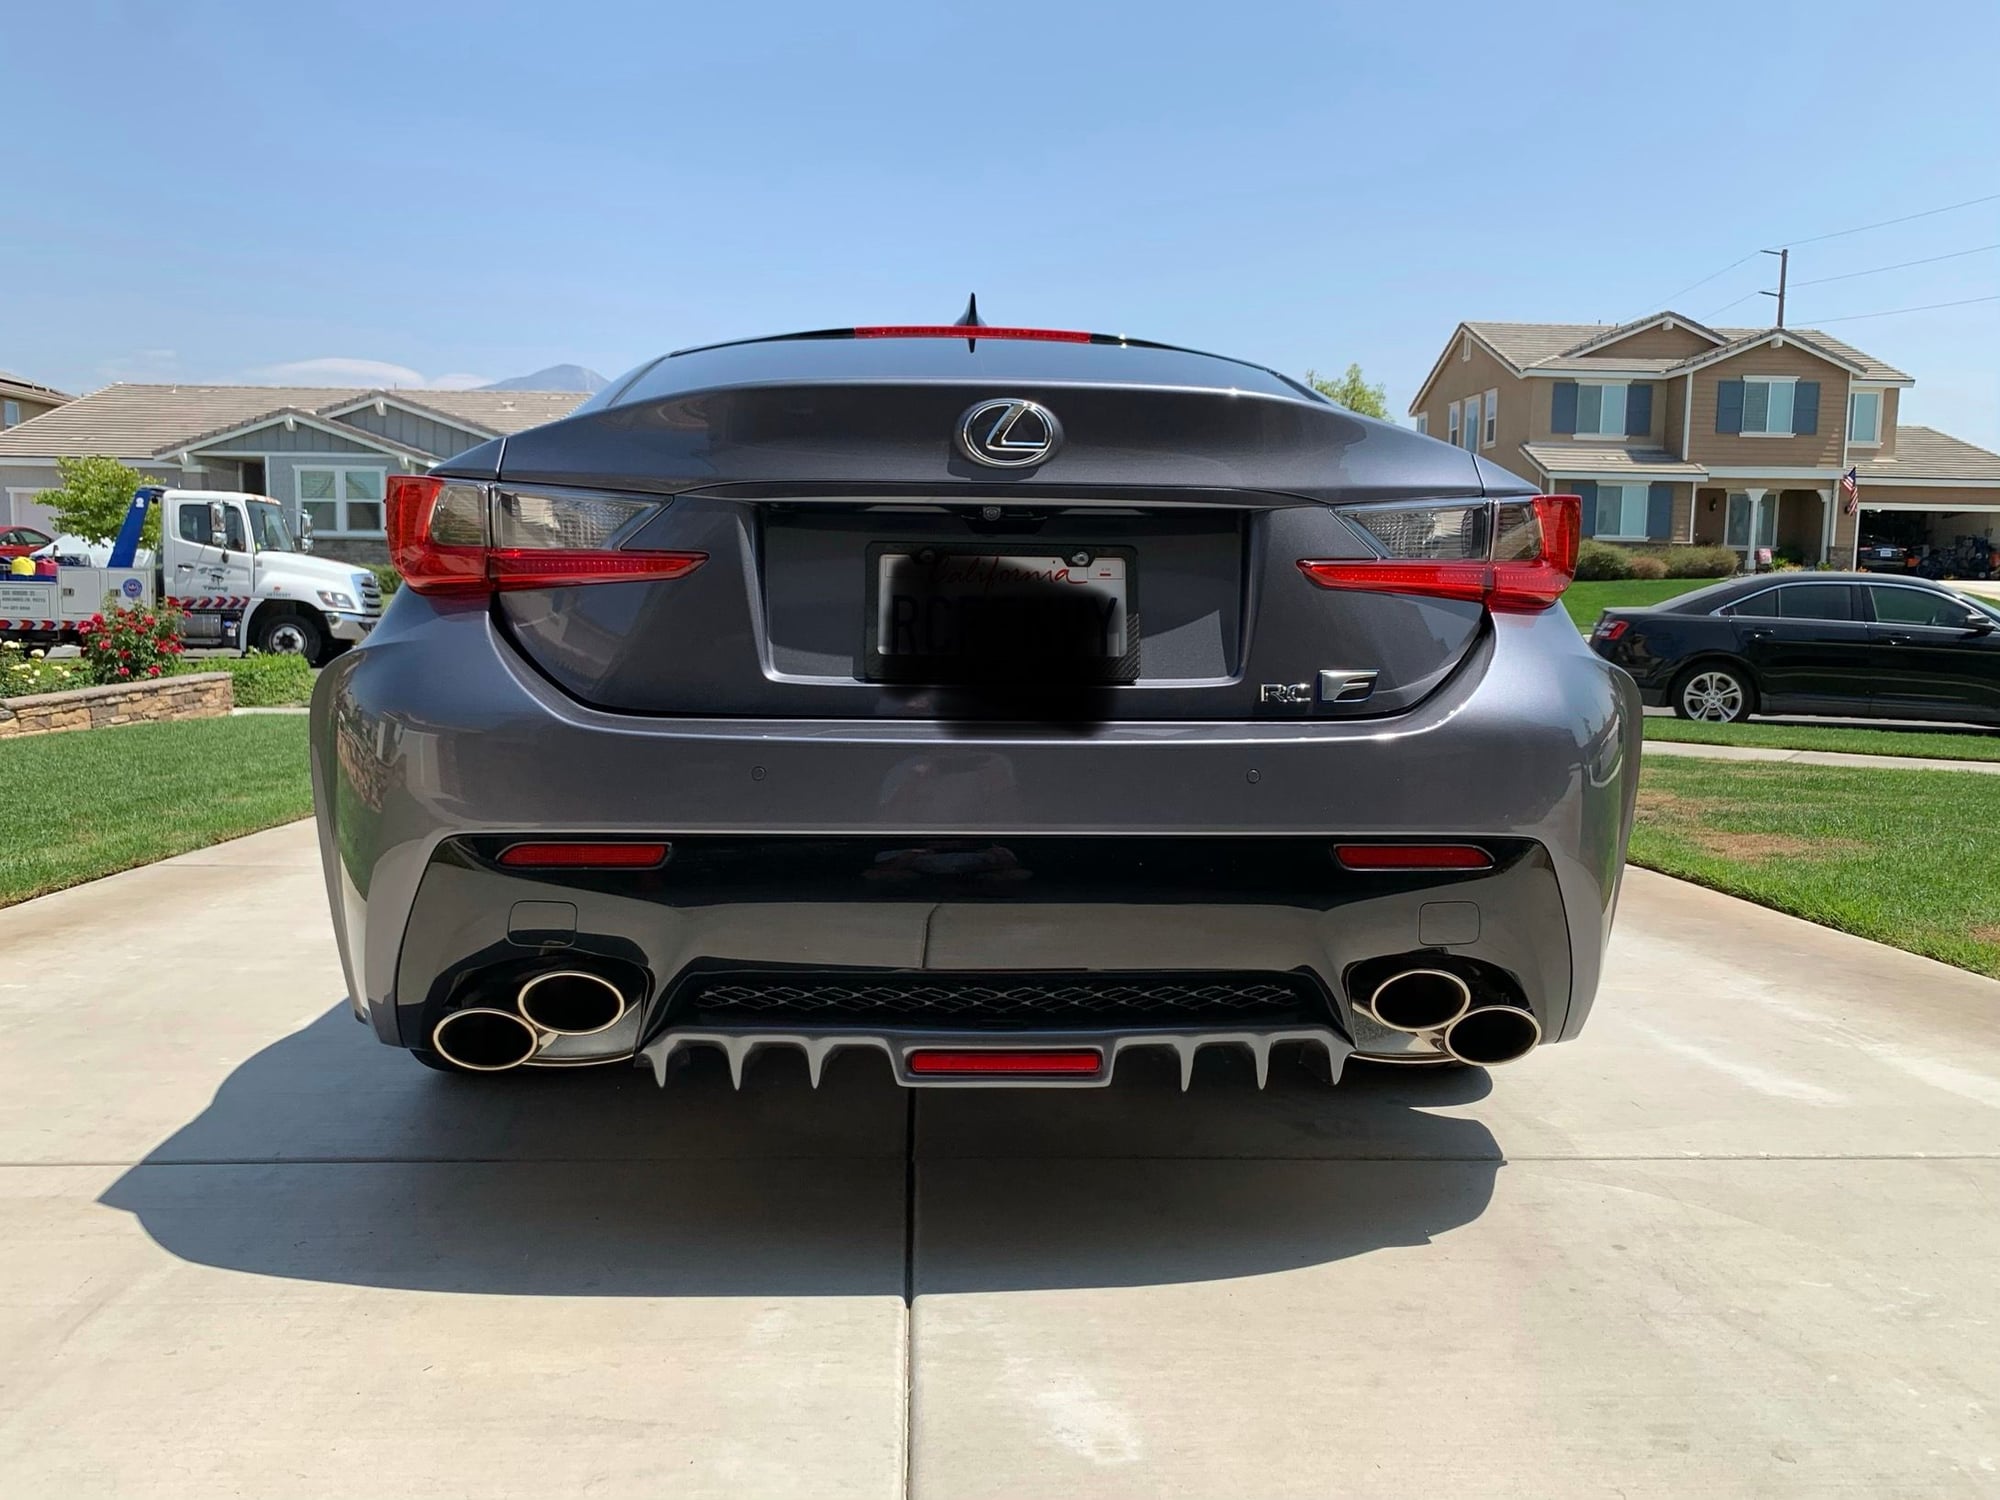 2019 Lexus RC F - 2019 Lexus RCF Single Owner - Used - VIN JTHHP5BC0K5007098 - 985 Miles - 8 cyl - 2WD - Automatic - Coupe - Gray - Redlands, CA 92374, United States